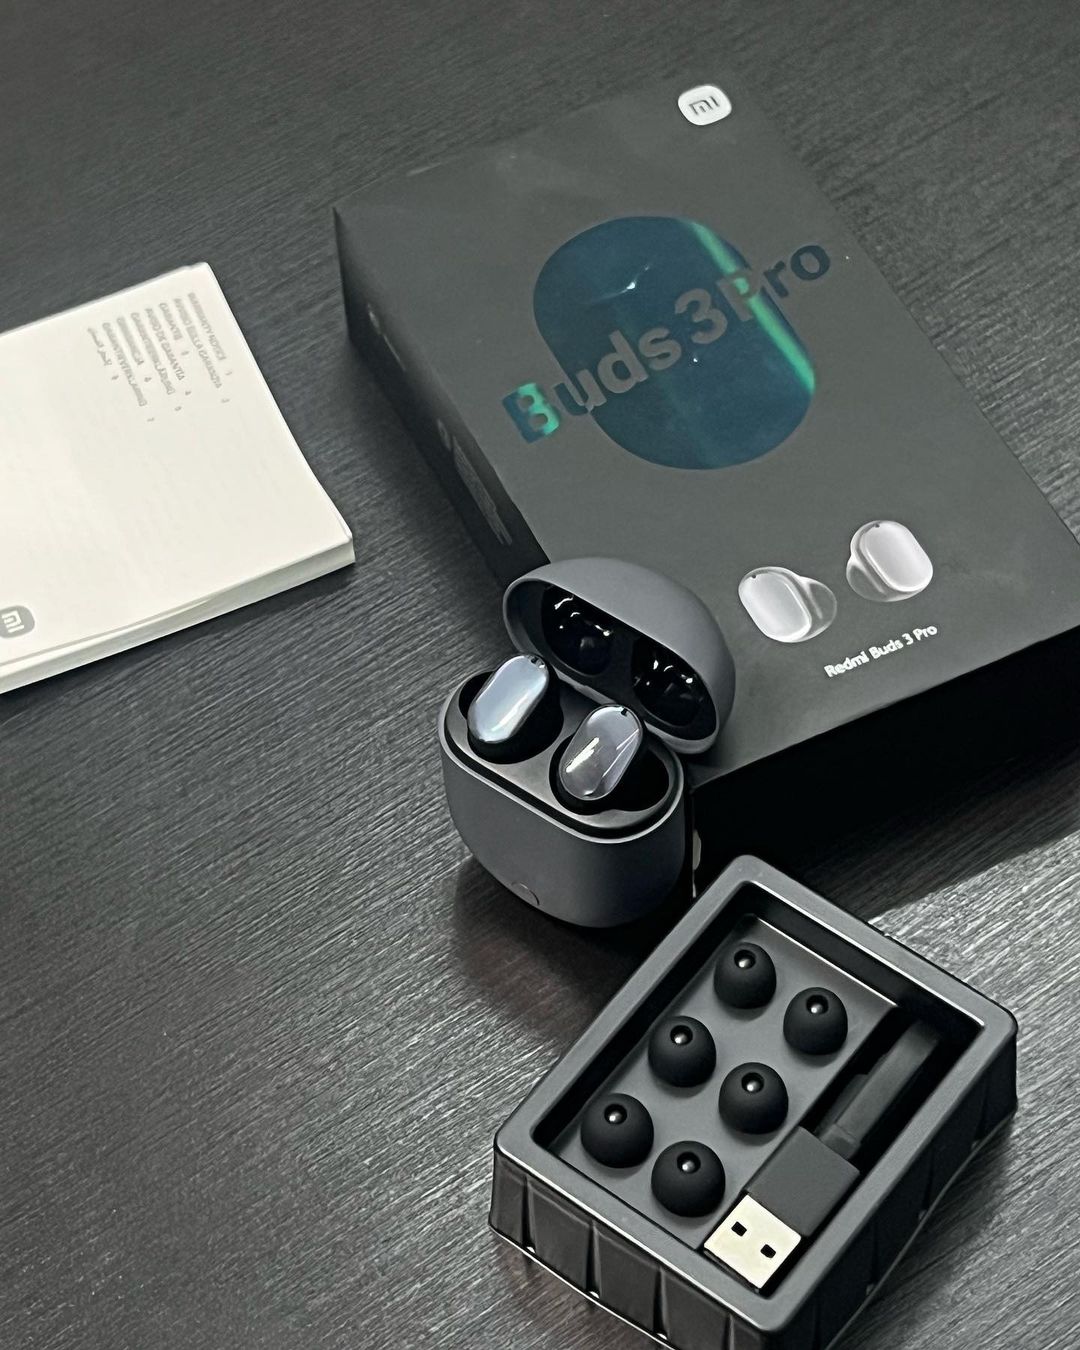 What to look for in your next TWS earbuds